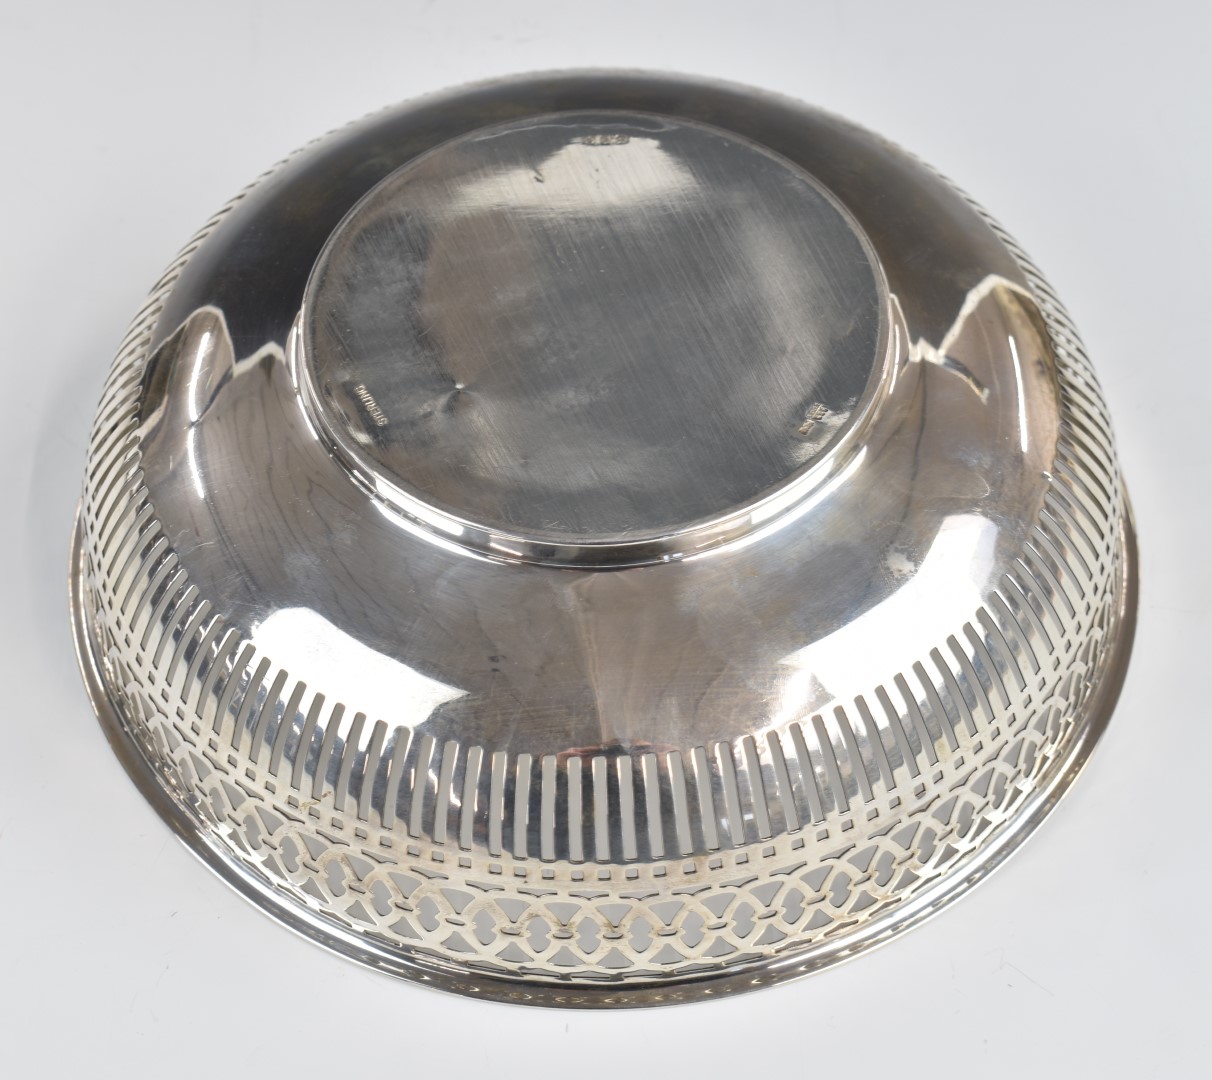 Canadian or American silver bowl with pierced decoration, marked 925/100, sterling and with marks - Image 3 of 4